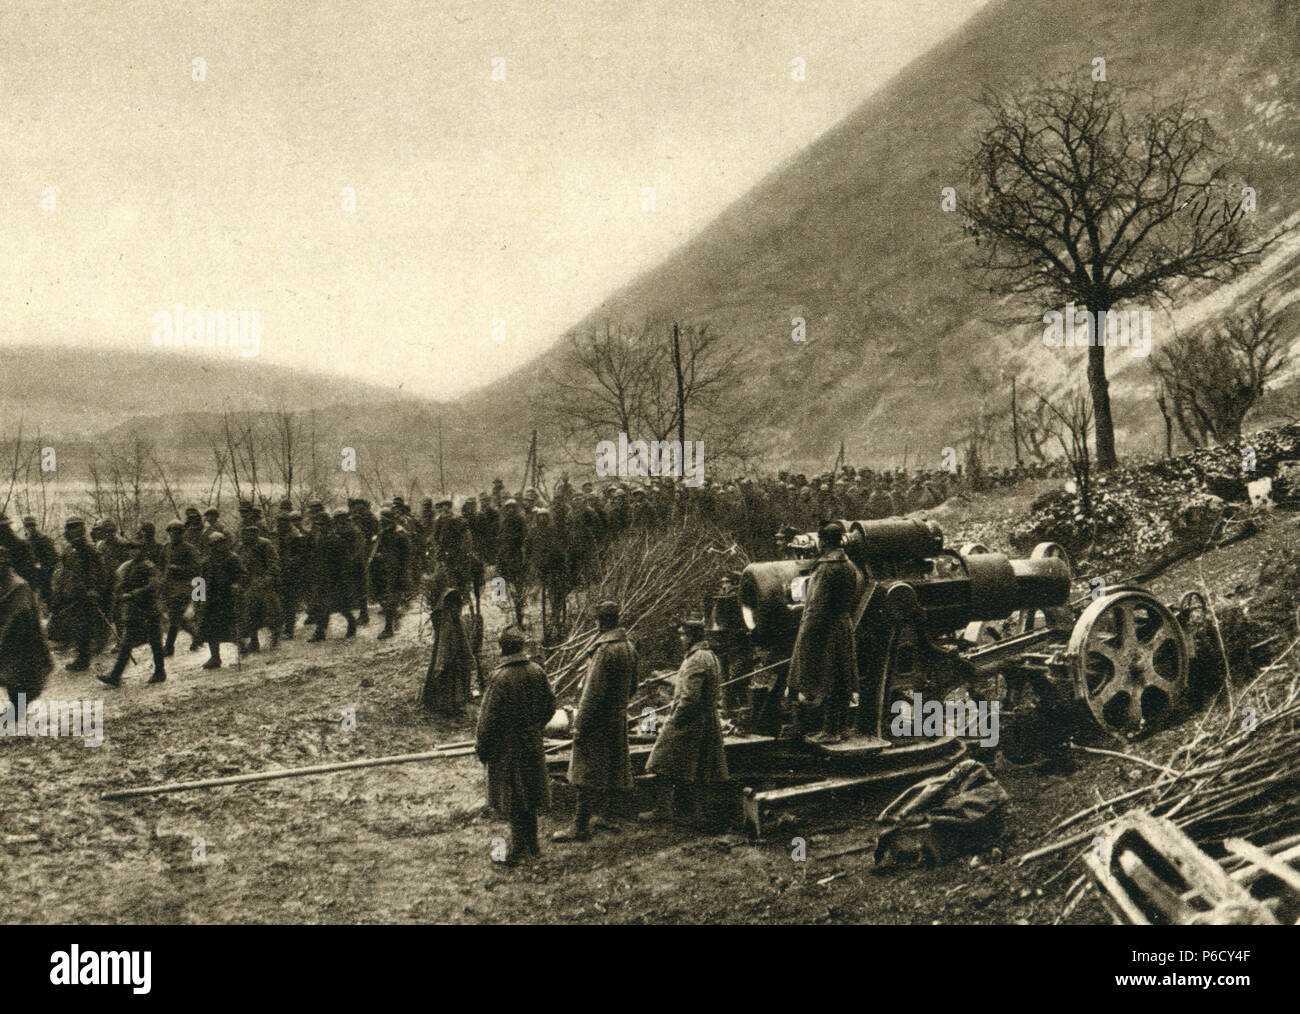 collecting point, prisoners of war, Italian soldiers, ww1, wwi, world war one Stock Photo